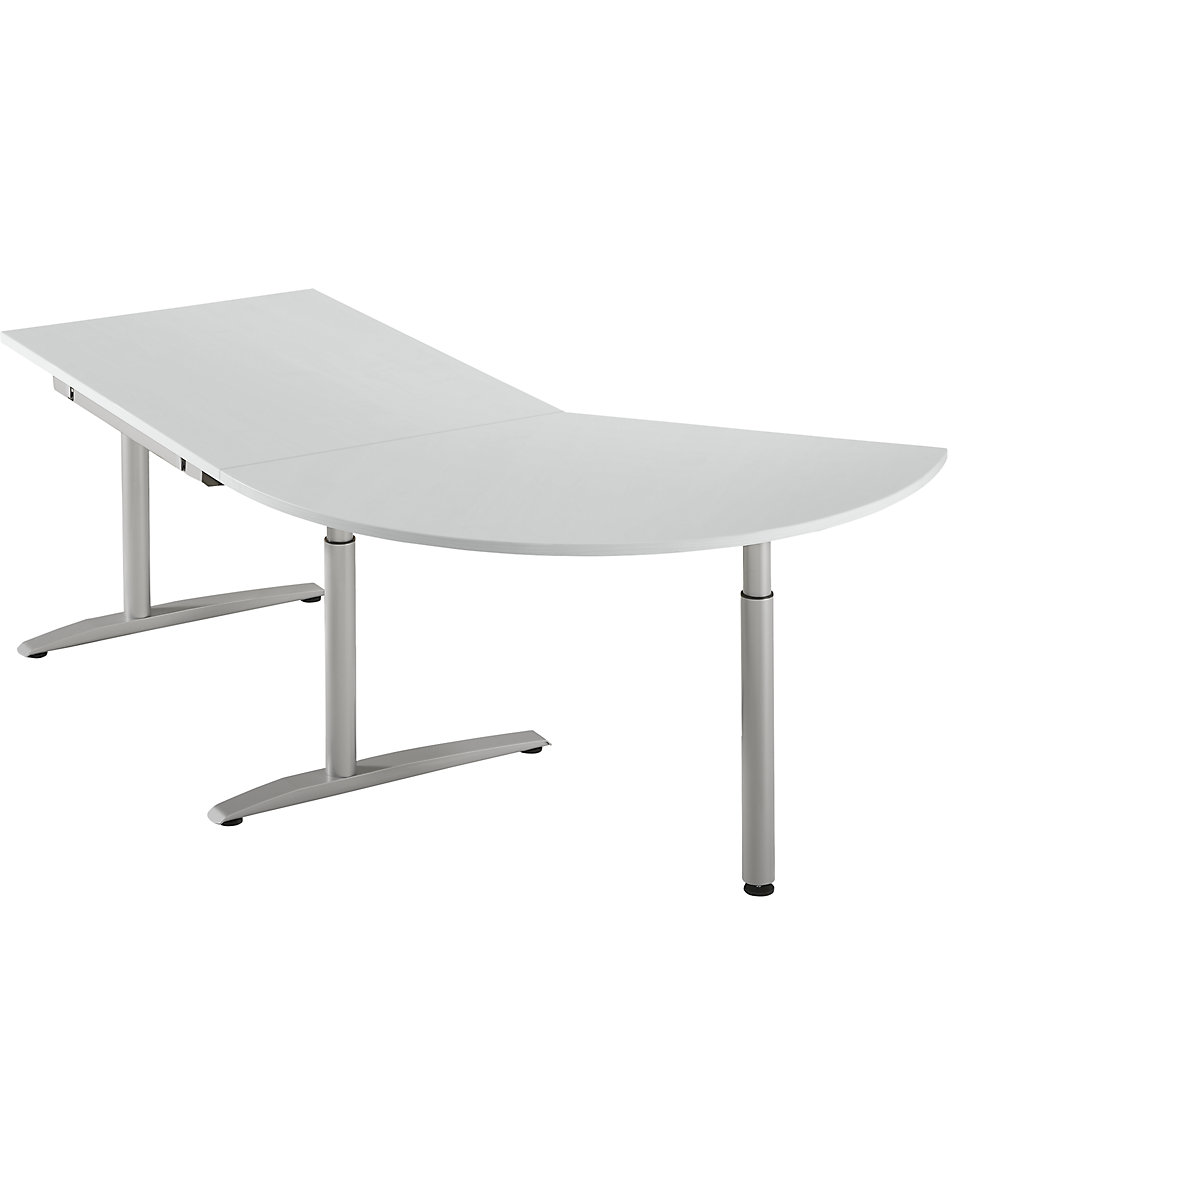 Add-on table, height adjustable from 650 - 850 mm HANNA